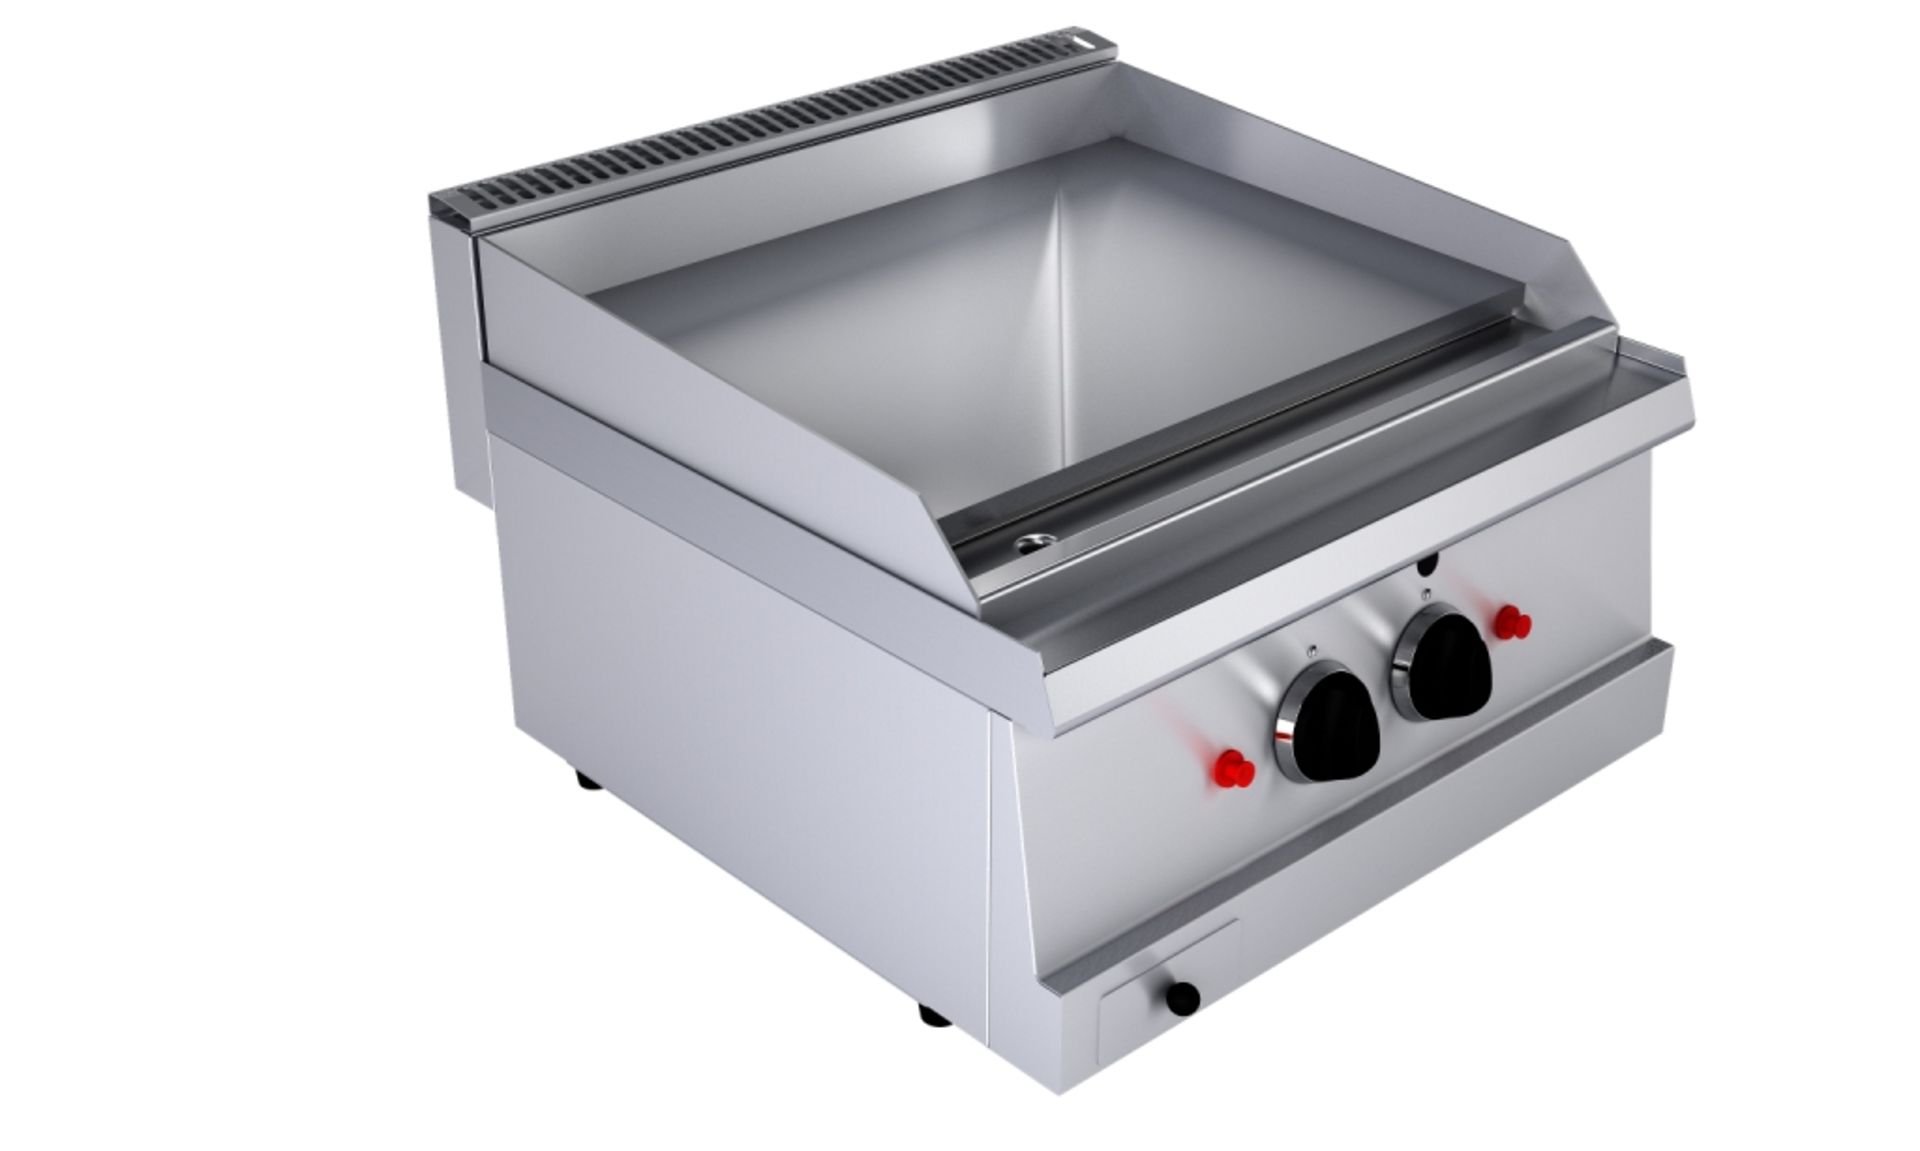 Griddle, counter top - smooth chrome - 7kW - 600W - GAS - RG6I200G-C